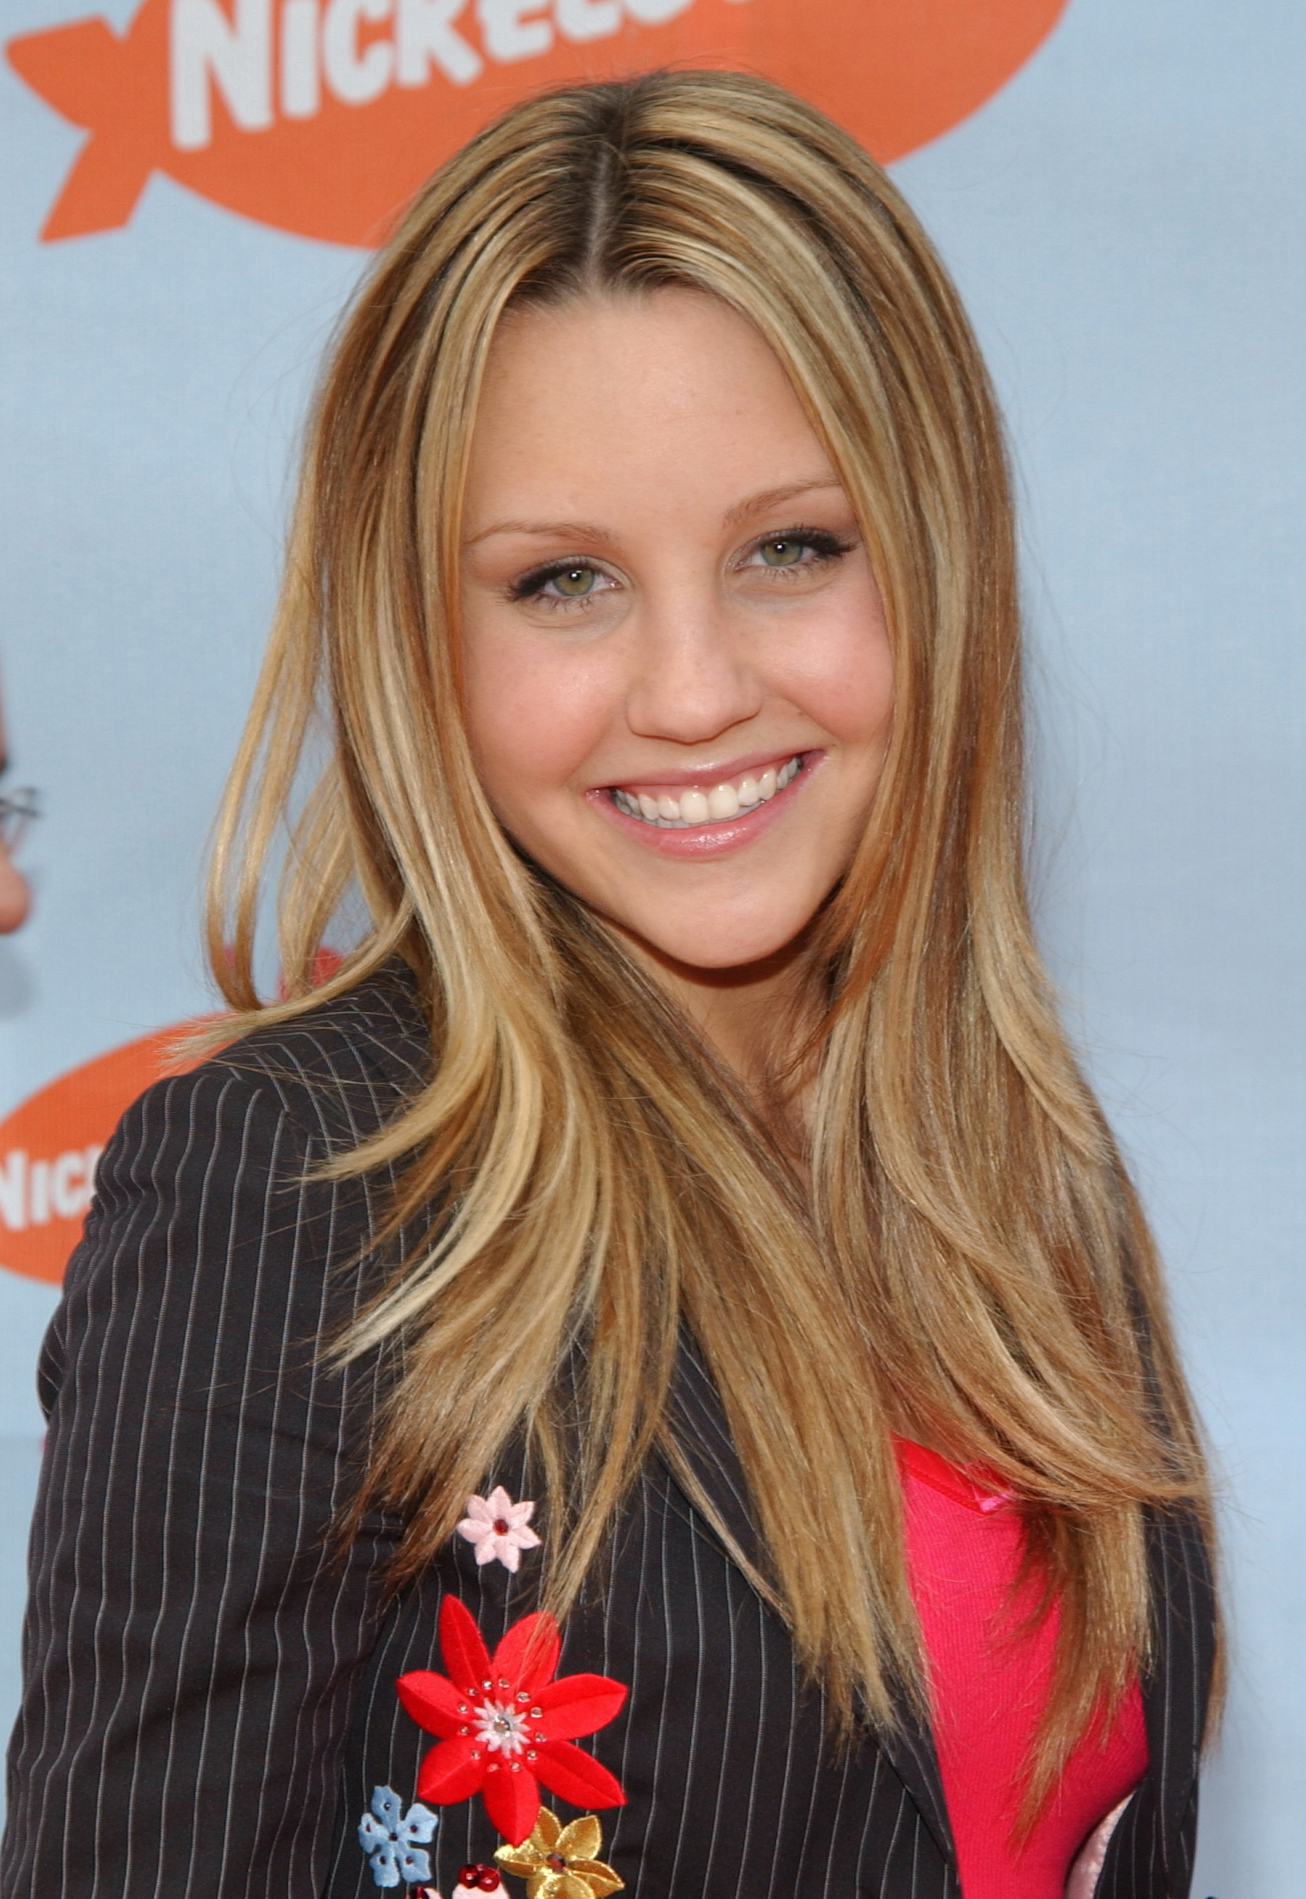 Amanda Bynes during Nickelodeon's 17th Annual Kids' Choice Awards - Arrivals at Pauley Pavillion in ...